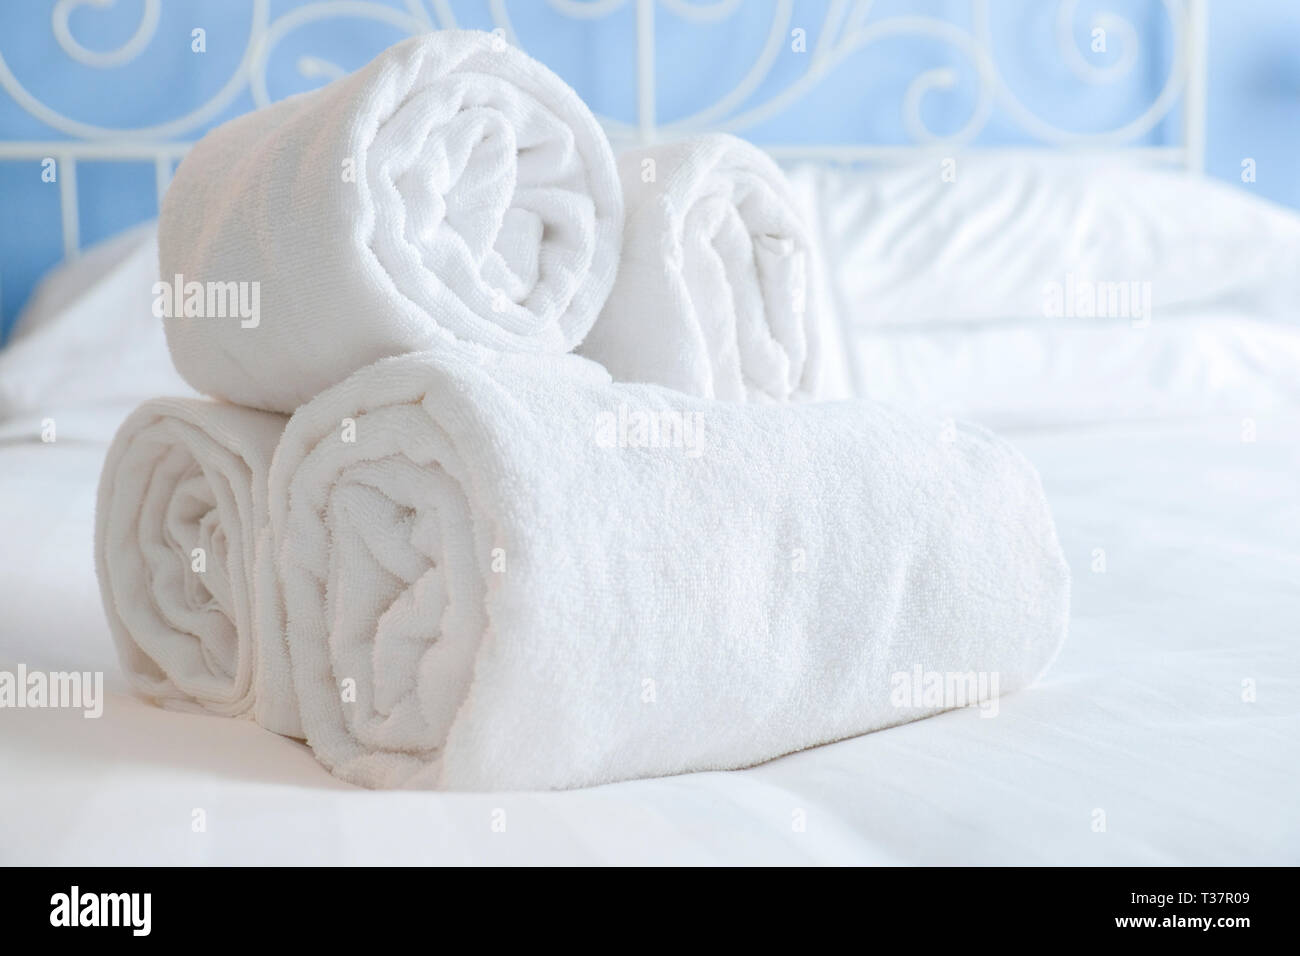 nicely rolled up clean and fresh towels lie on the white sheets of a steel bed in a beautifully lit hotel room Stock Photo